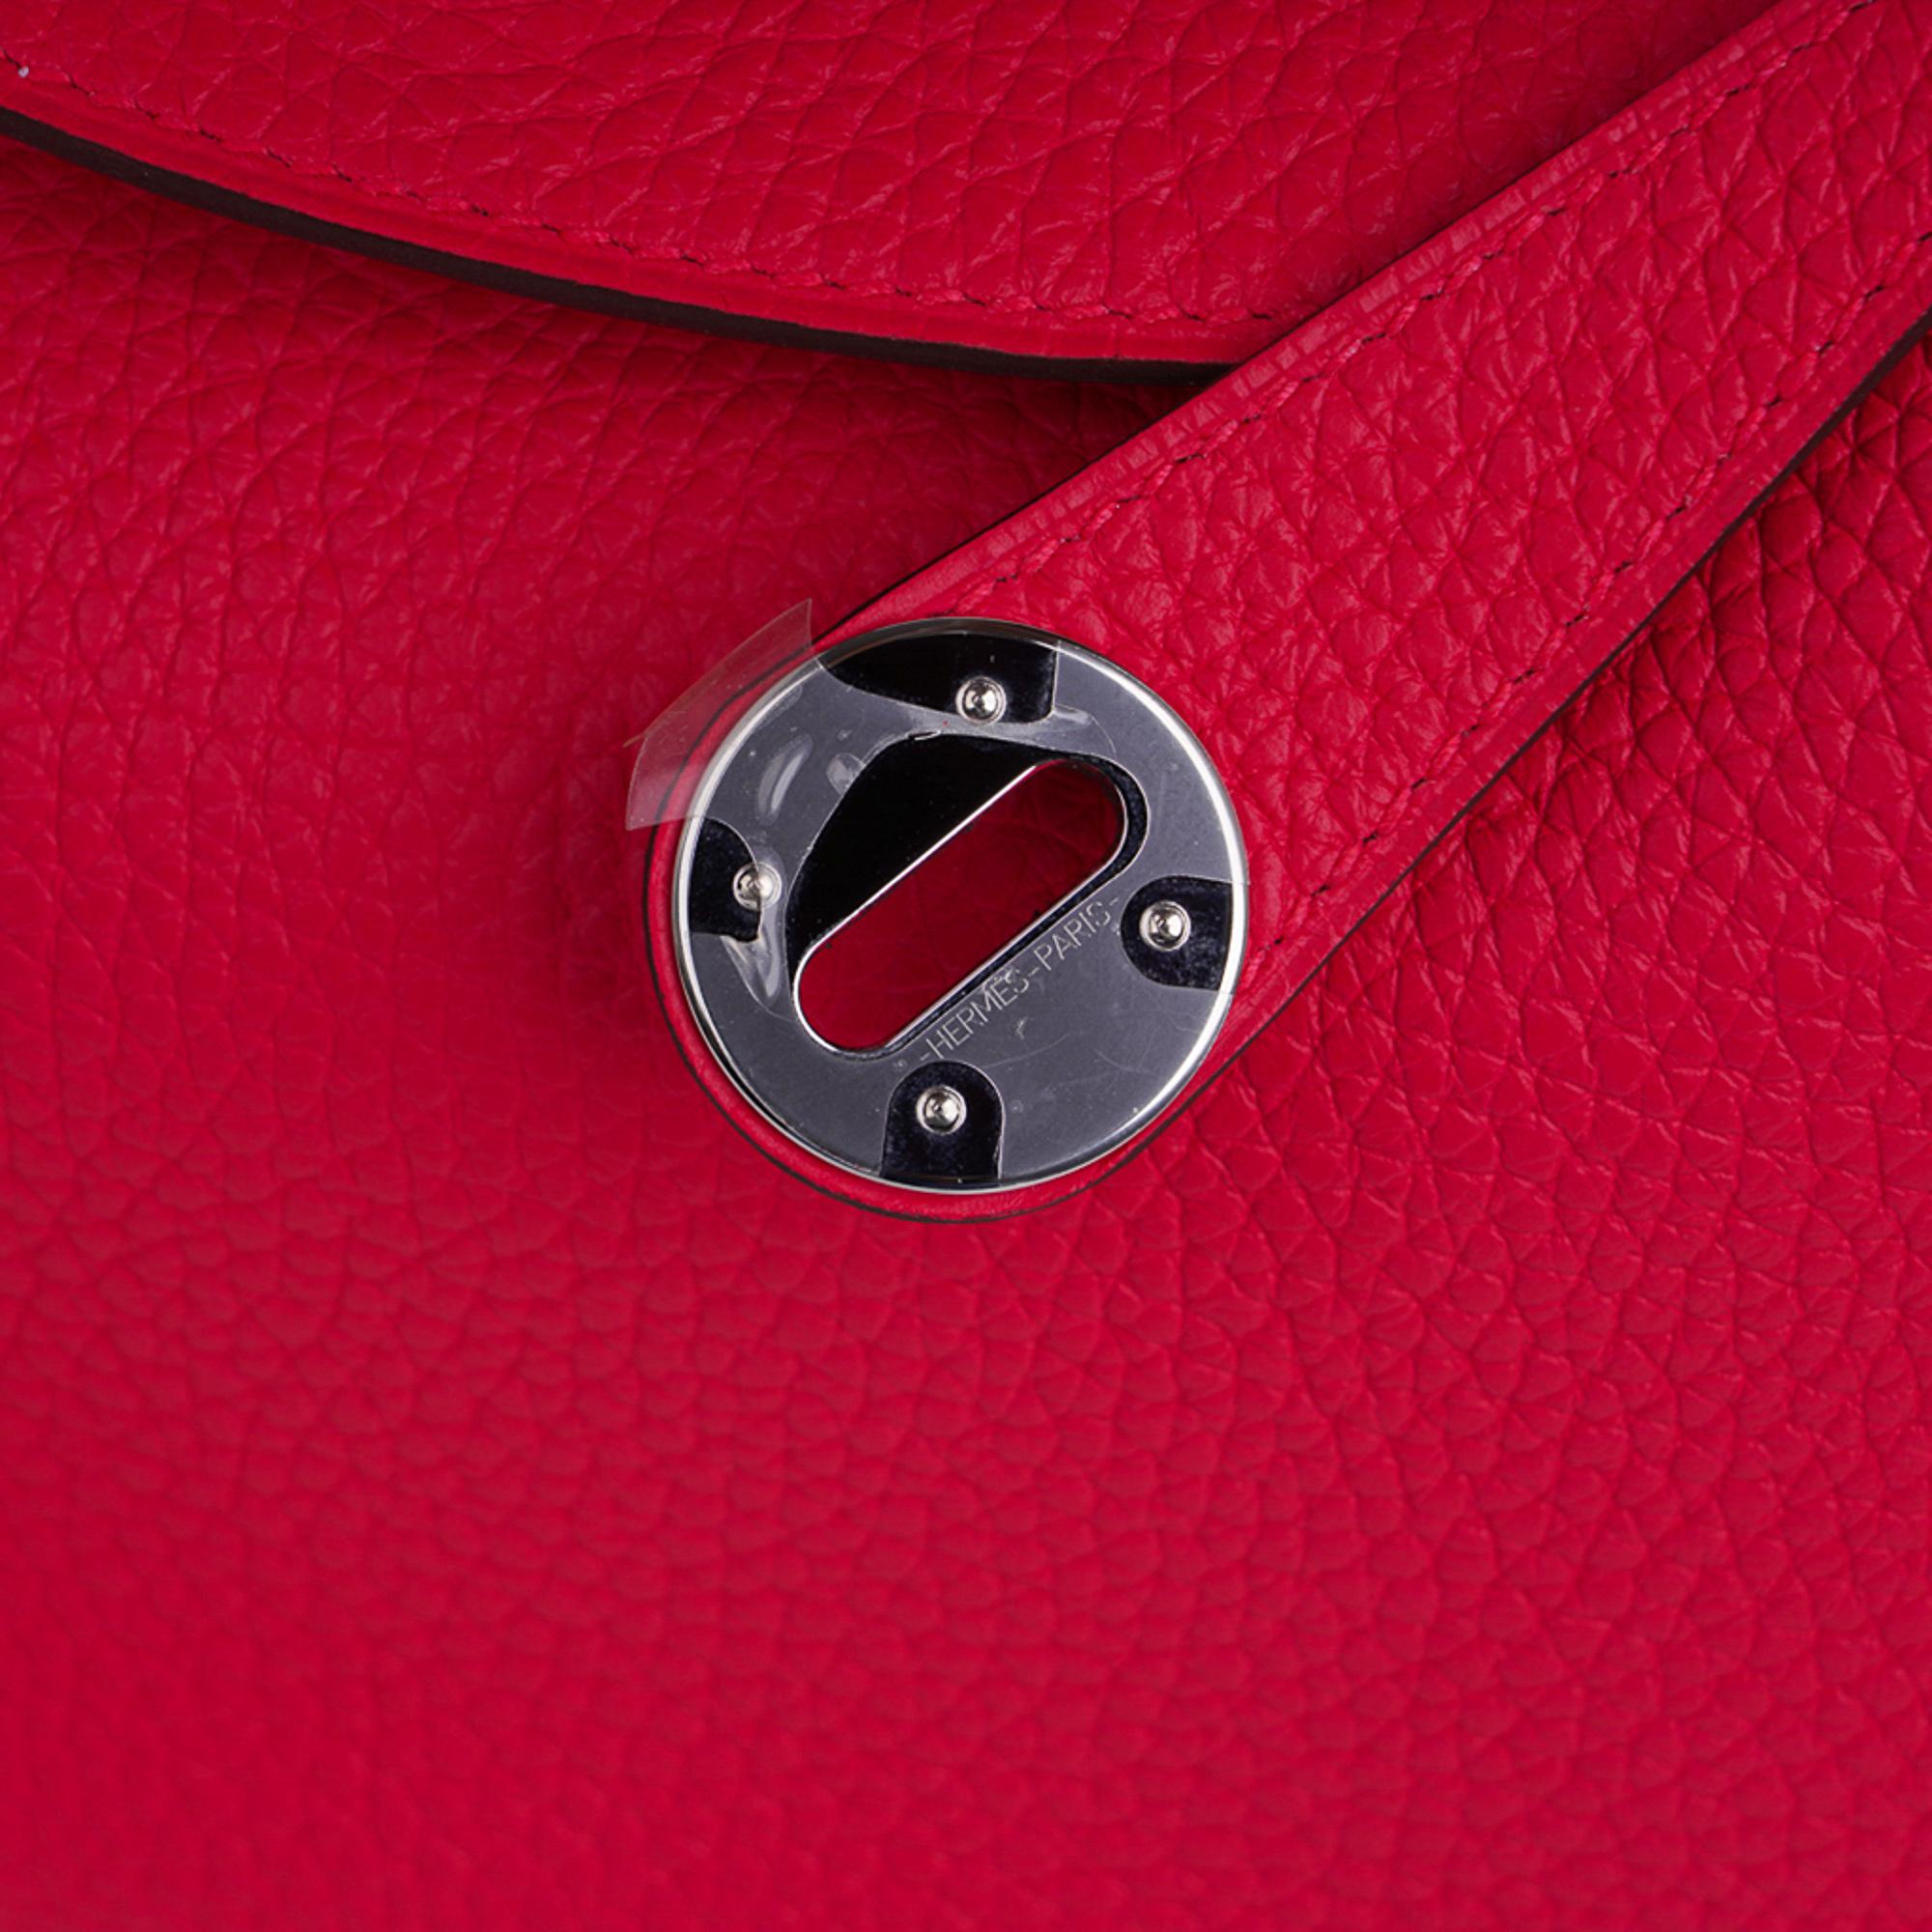 Guaranteed authentic Hermes Lindy 26 bag featured in rich Rose Extreme pink.
Supple soft Clemence leather.
Freah with palladium hardware.
This versatile bag can be carried by hand, or shoulder.
Spacious interior with an interior pocket on each